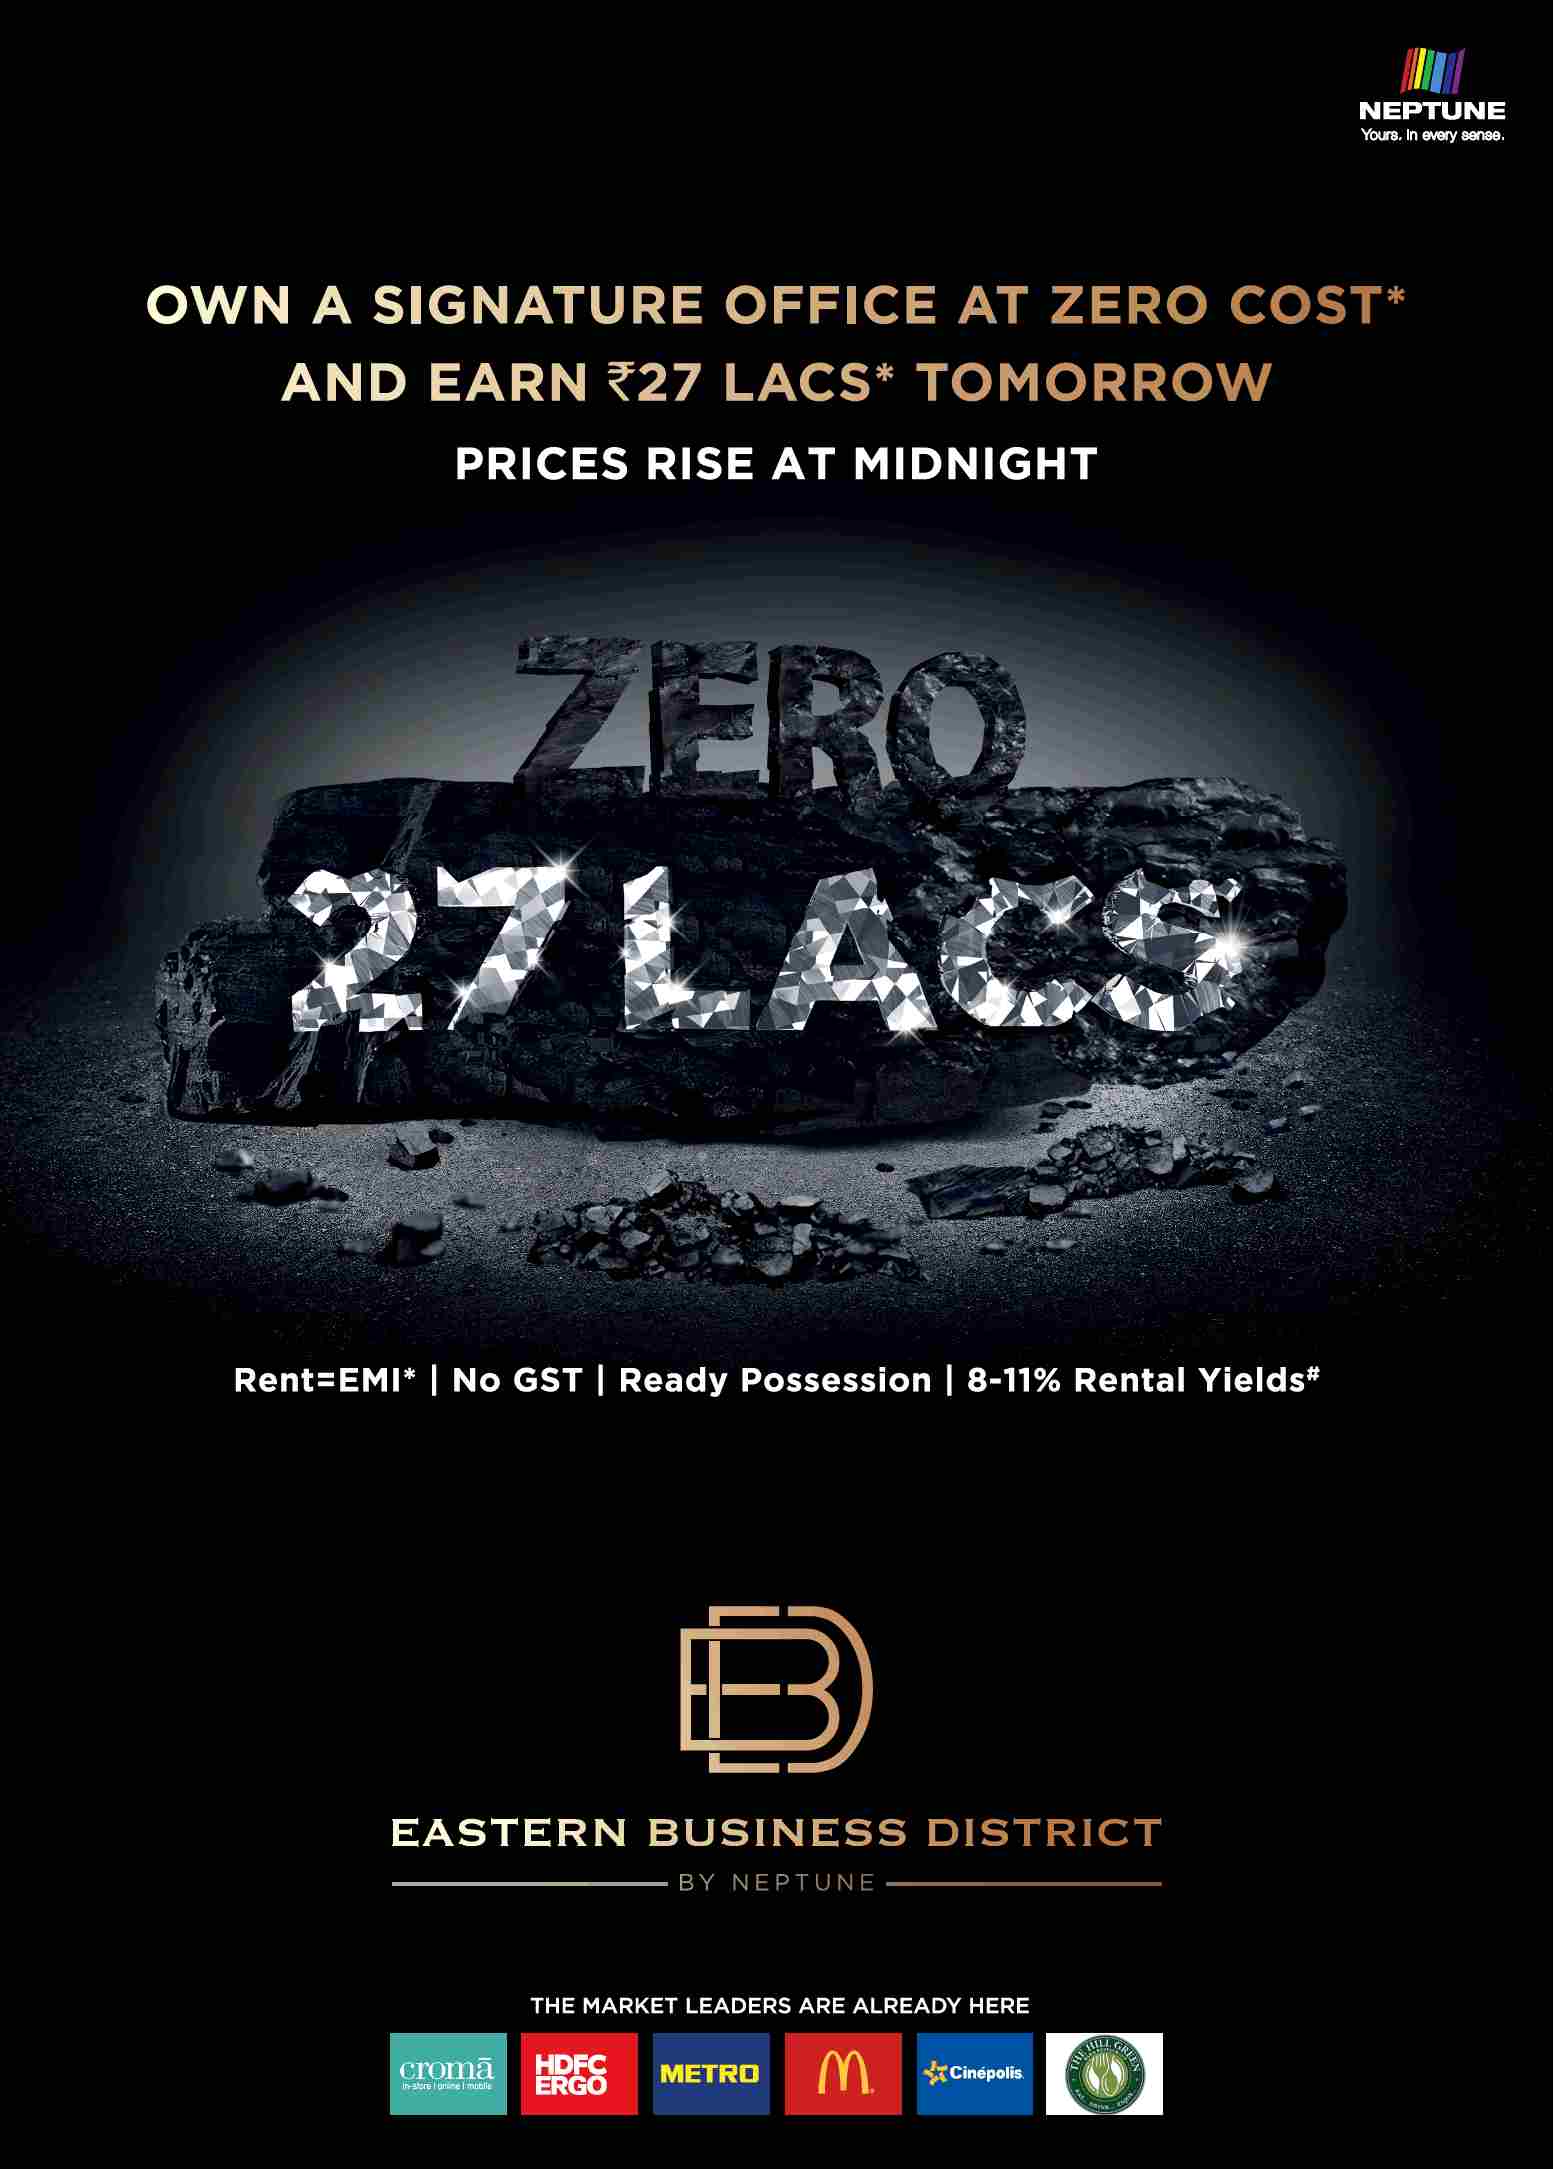 Own a signature office at zero cost and earn Rs. 27 Lacs at Neptune Eastern Business District in Mumbai